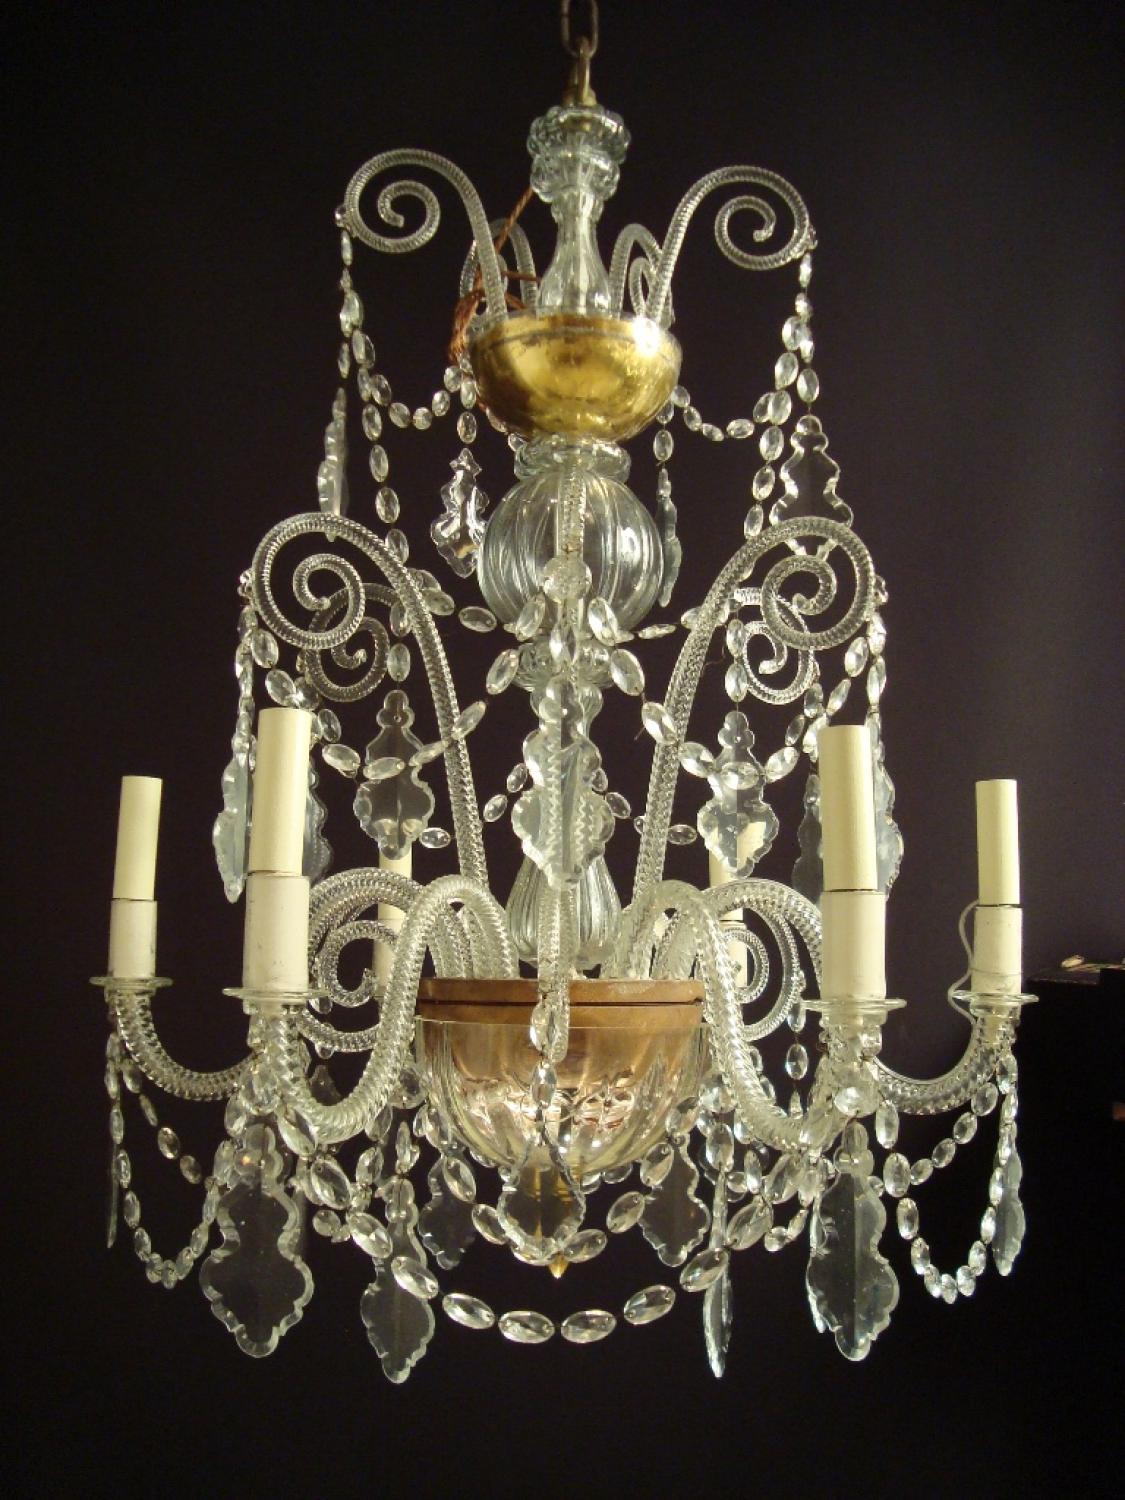 A six armed glass and gilded chandelier